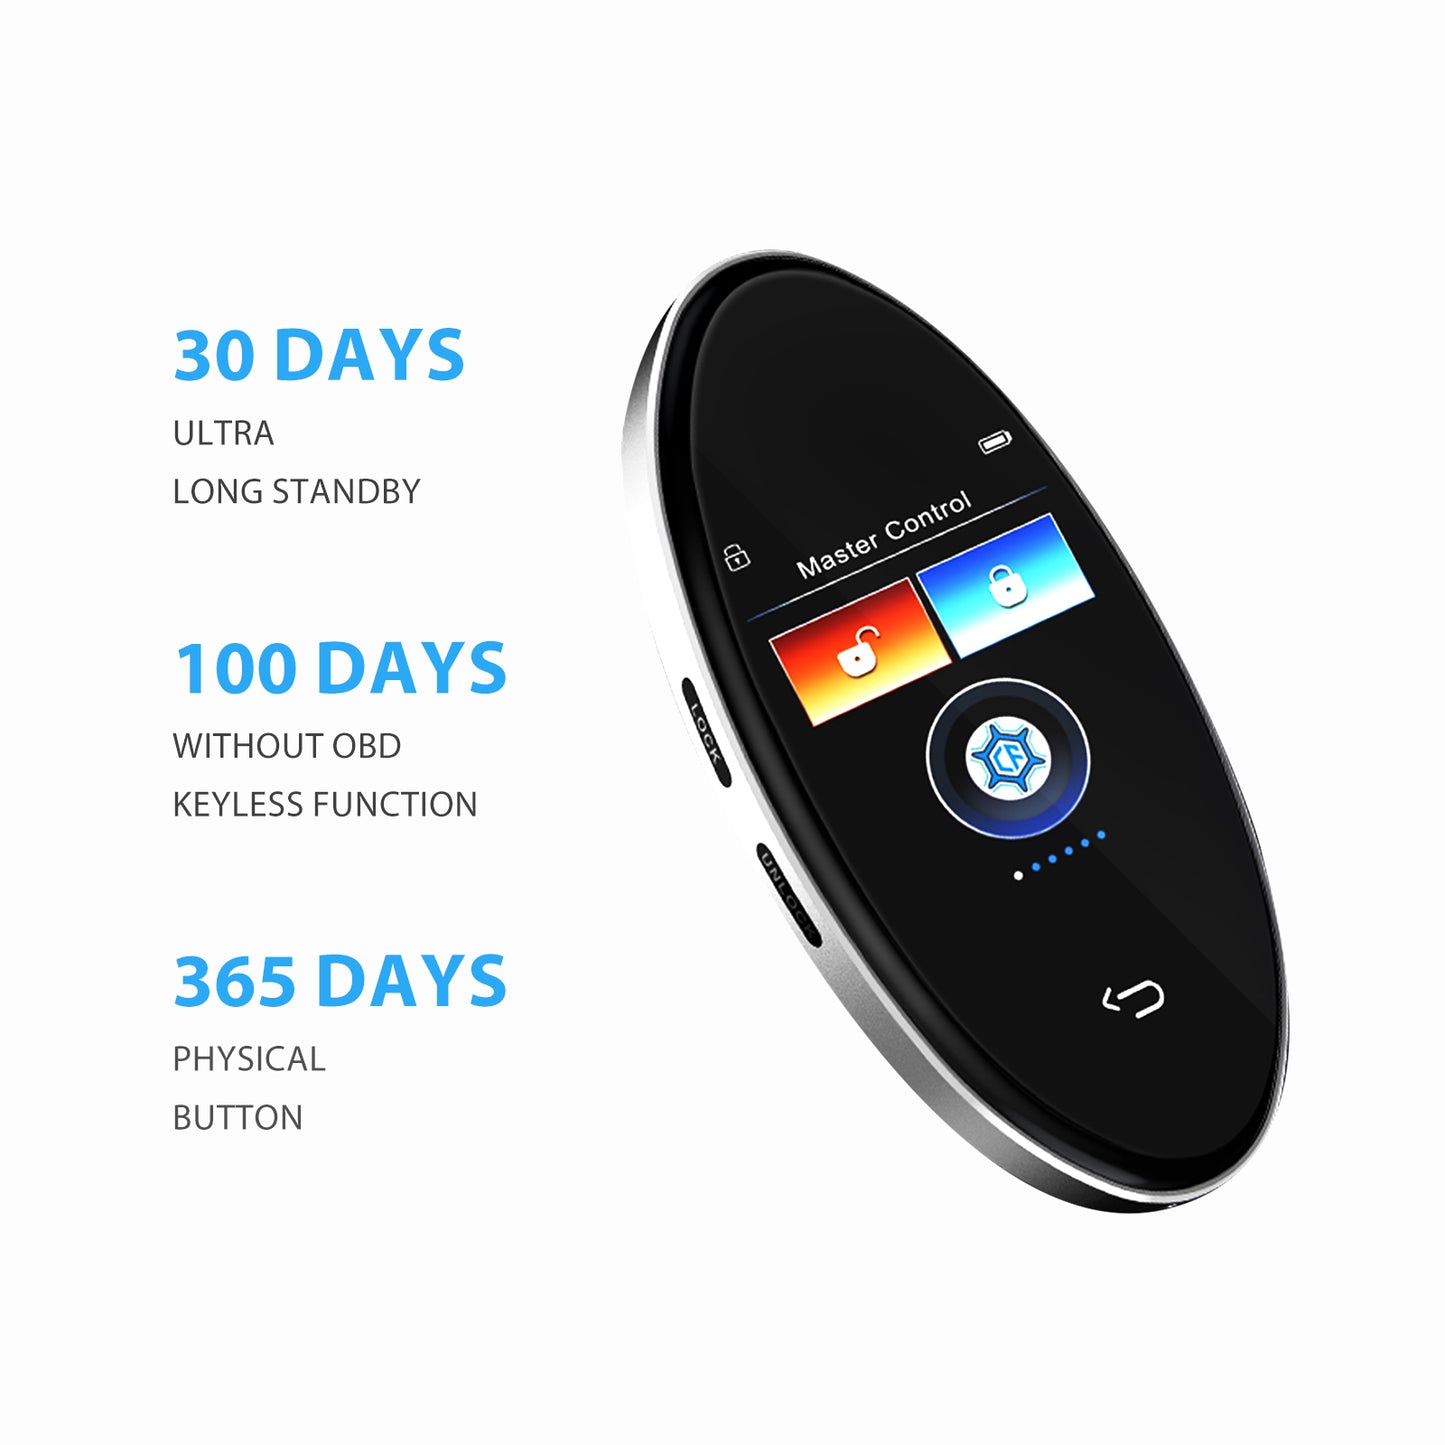 2022 Best Selling CF818 Keyless Entry System Touch Screen Smart LCD Car Key For All Vehicles